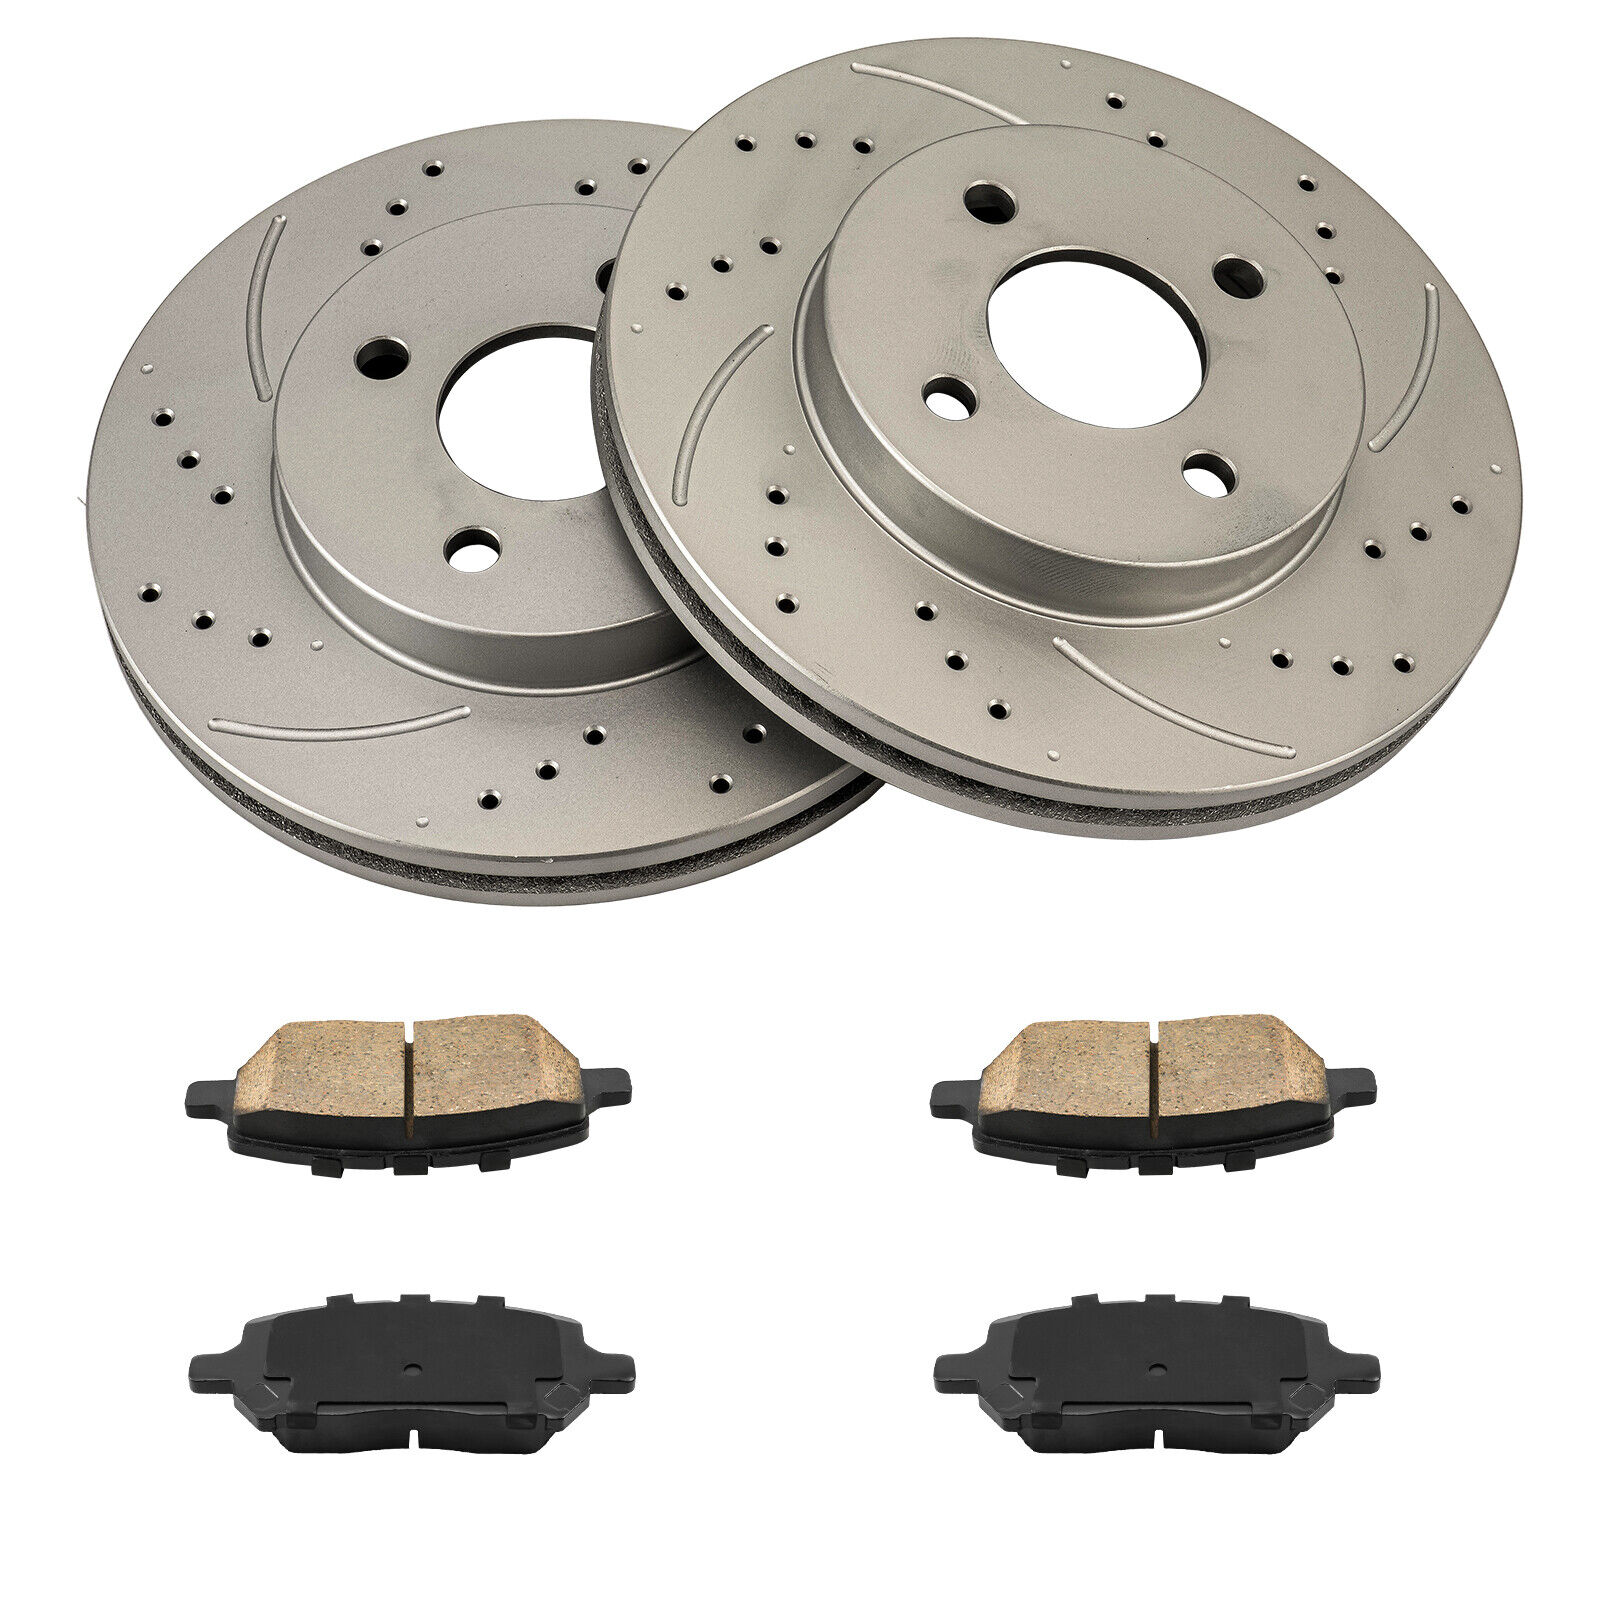 55083 Front Drilled Brake Rotors W/ Ceramic Pads For Chevy Cobalt Pontiac G5